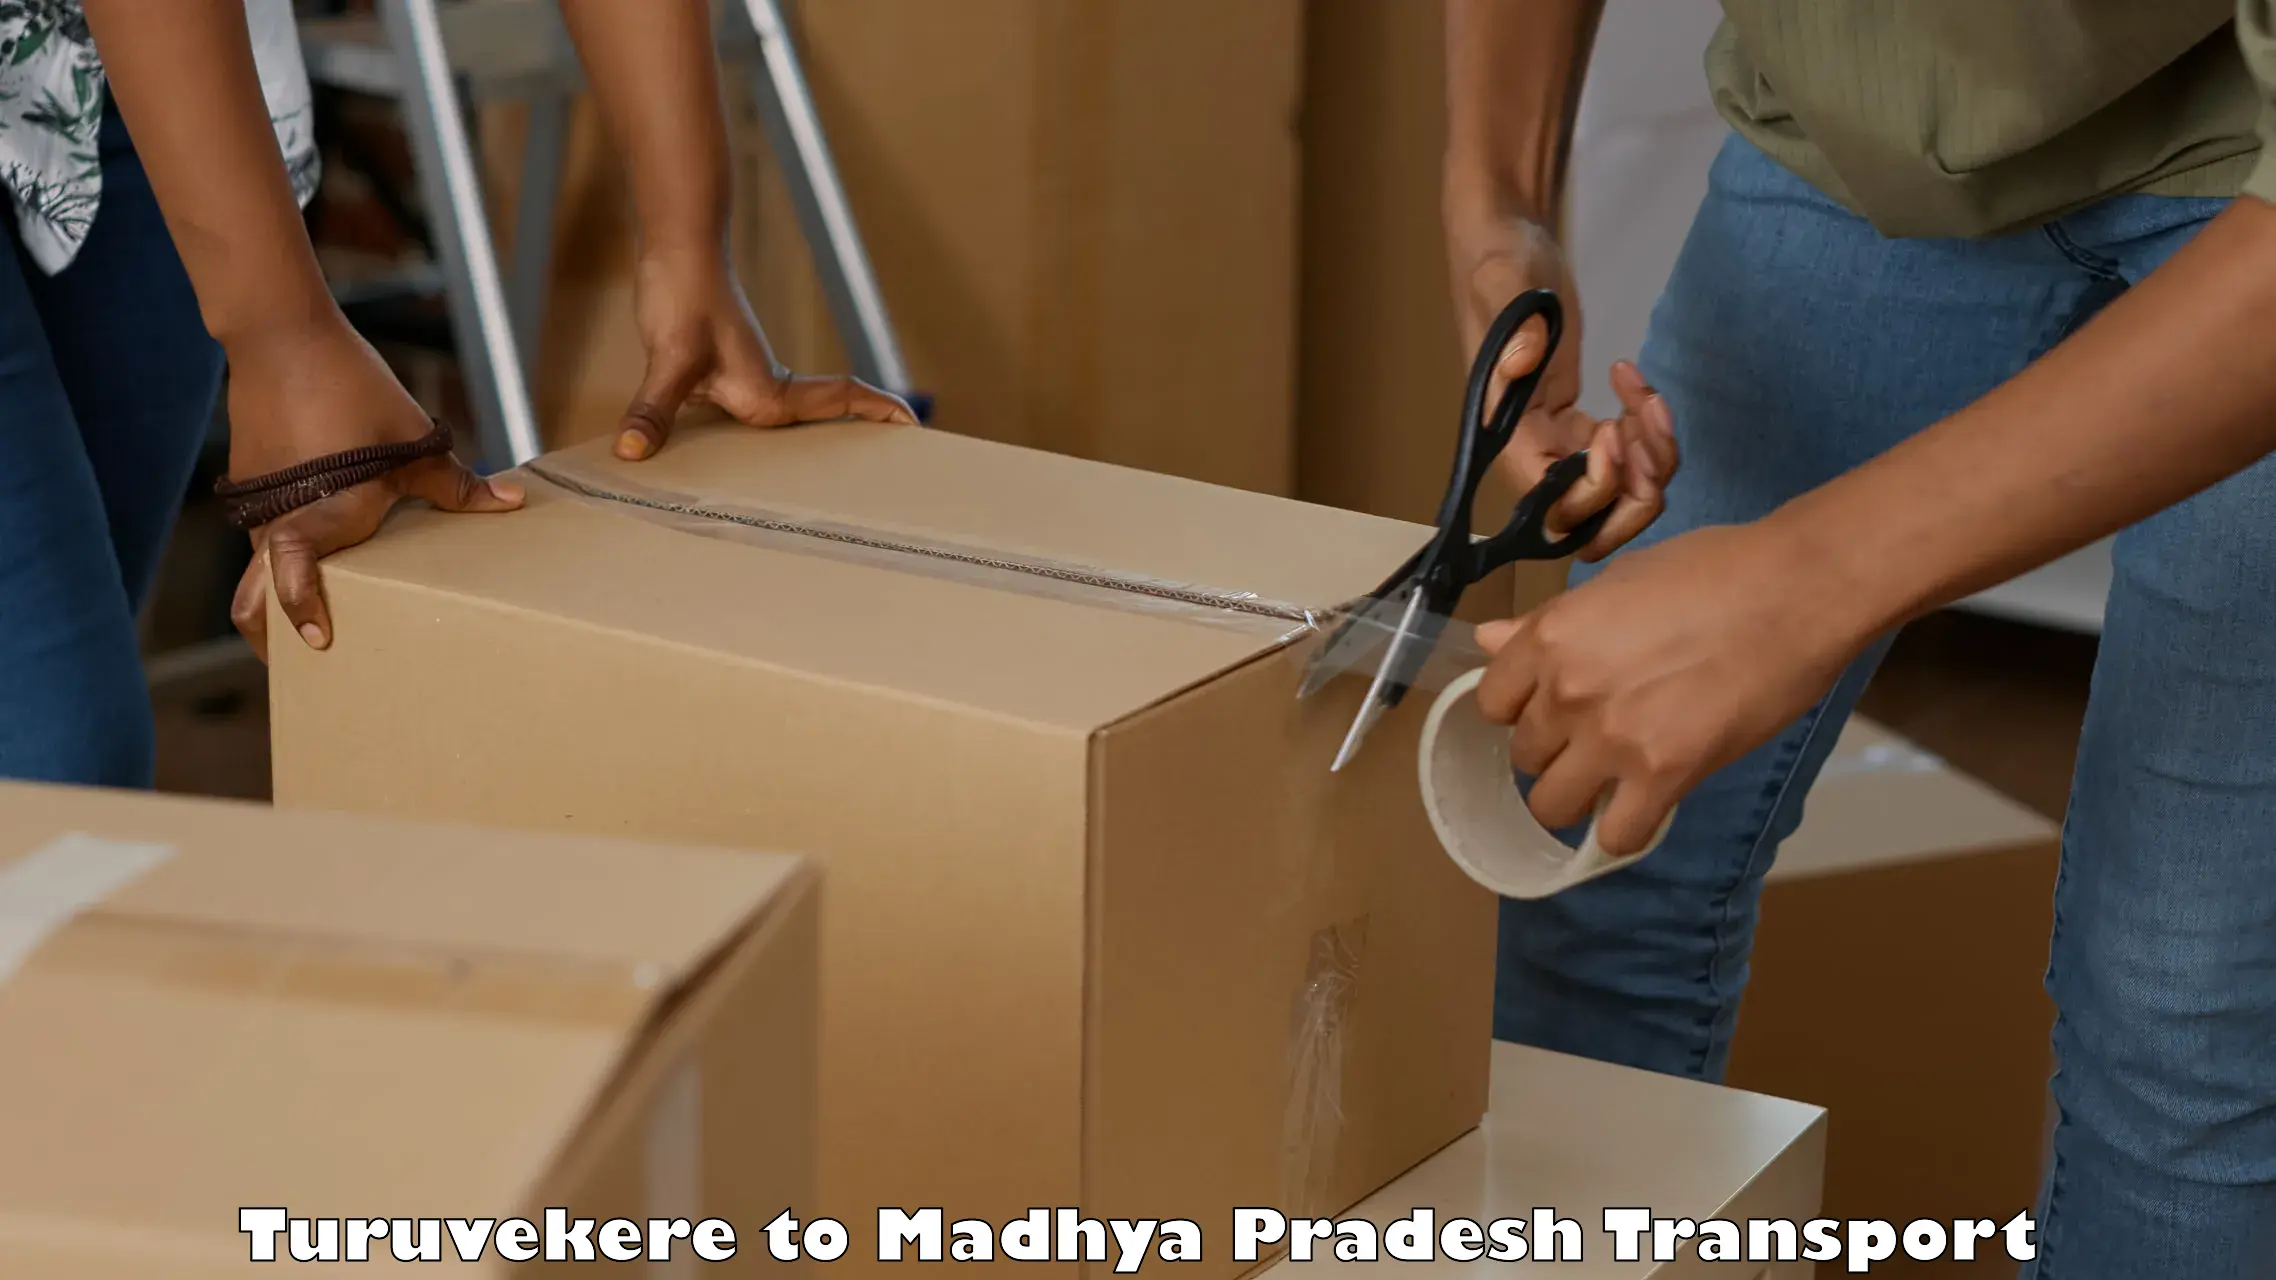 Container transport service Turuvekere to Chhatarpur